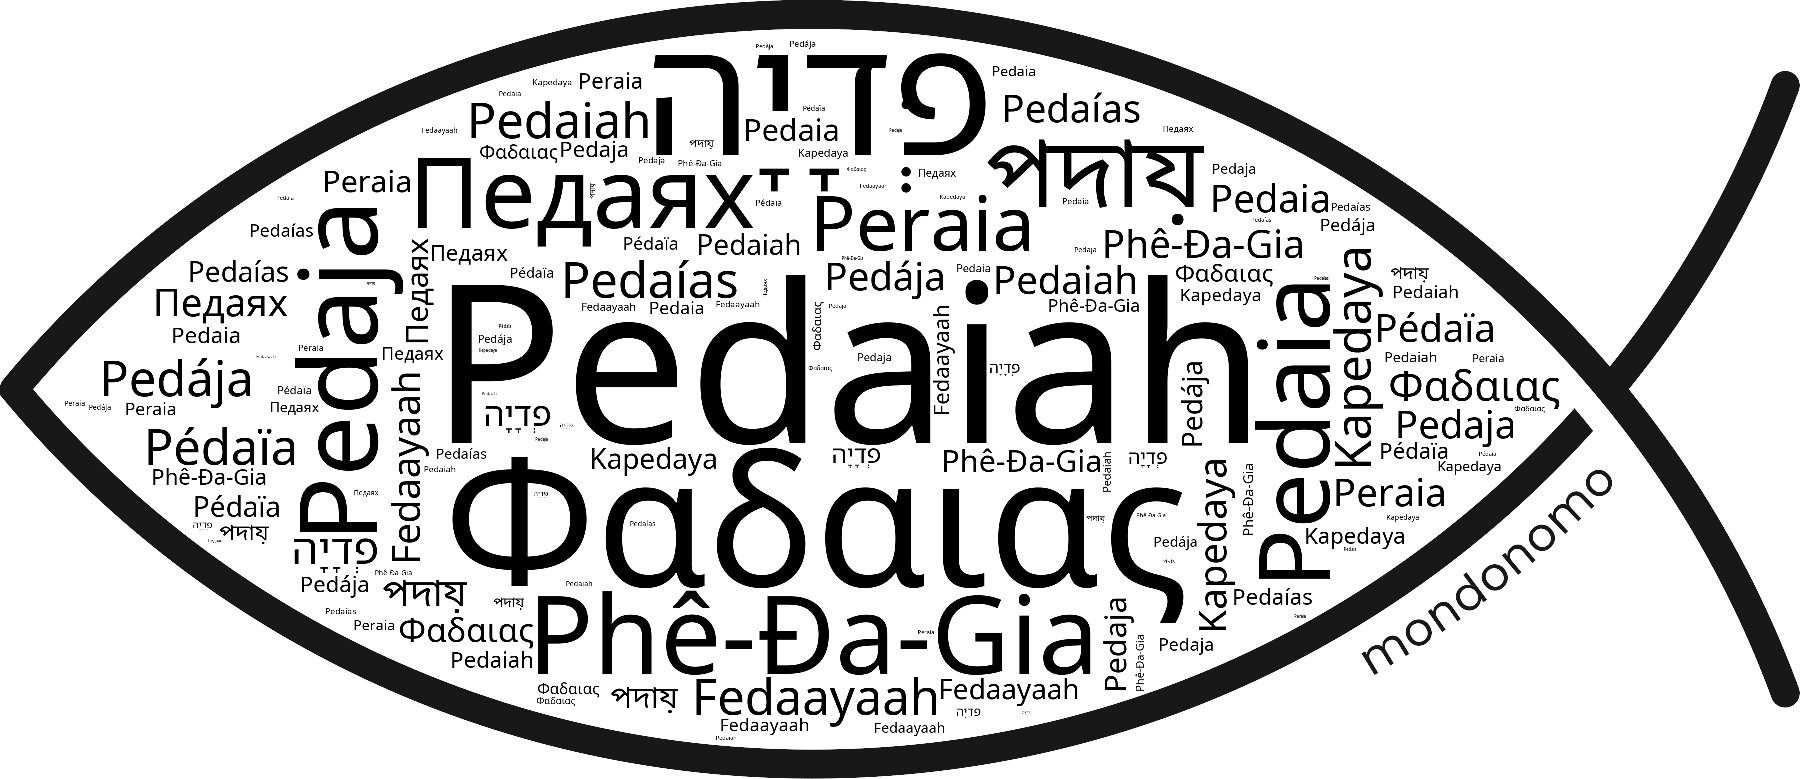 Name Pedaiah in the world's Bibles